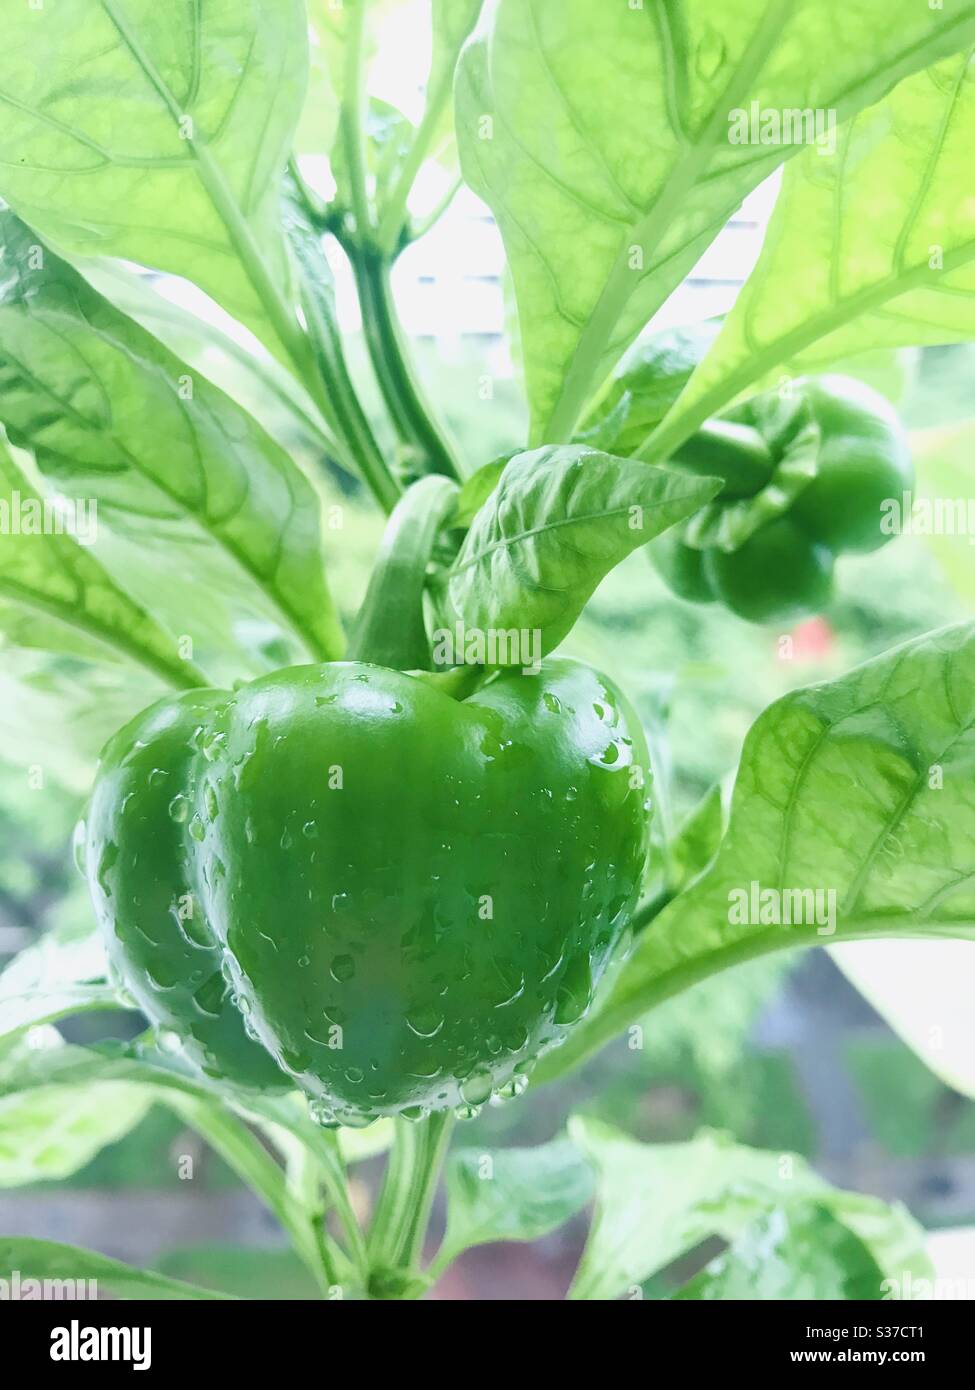 Green capsicum in my garden took while raining. Nature preserves everything we need to protect. Stock Photo